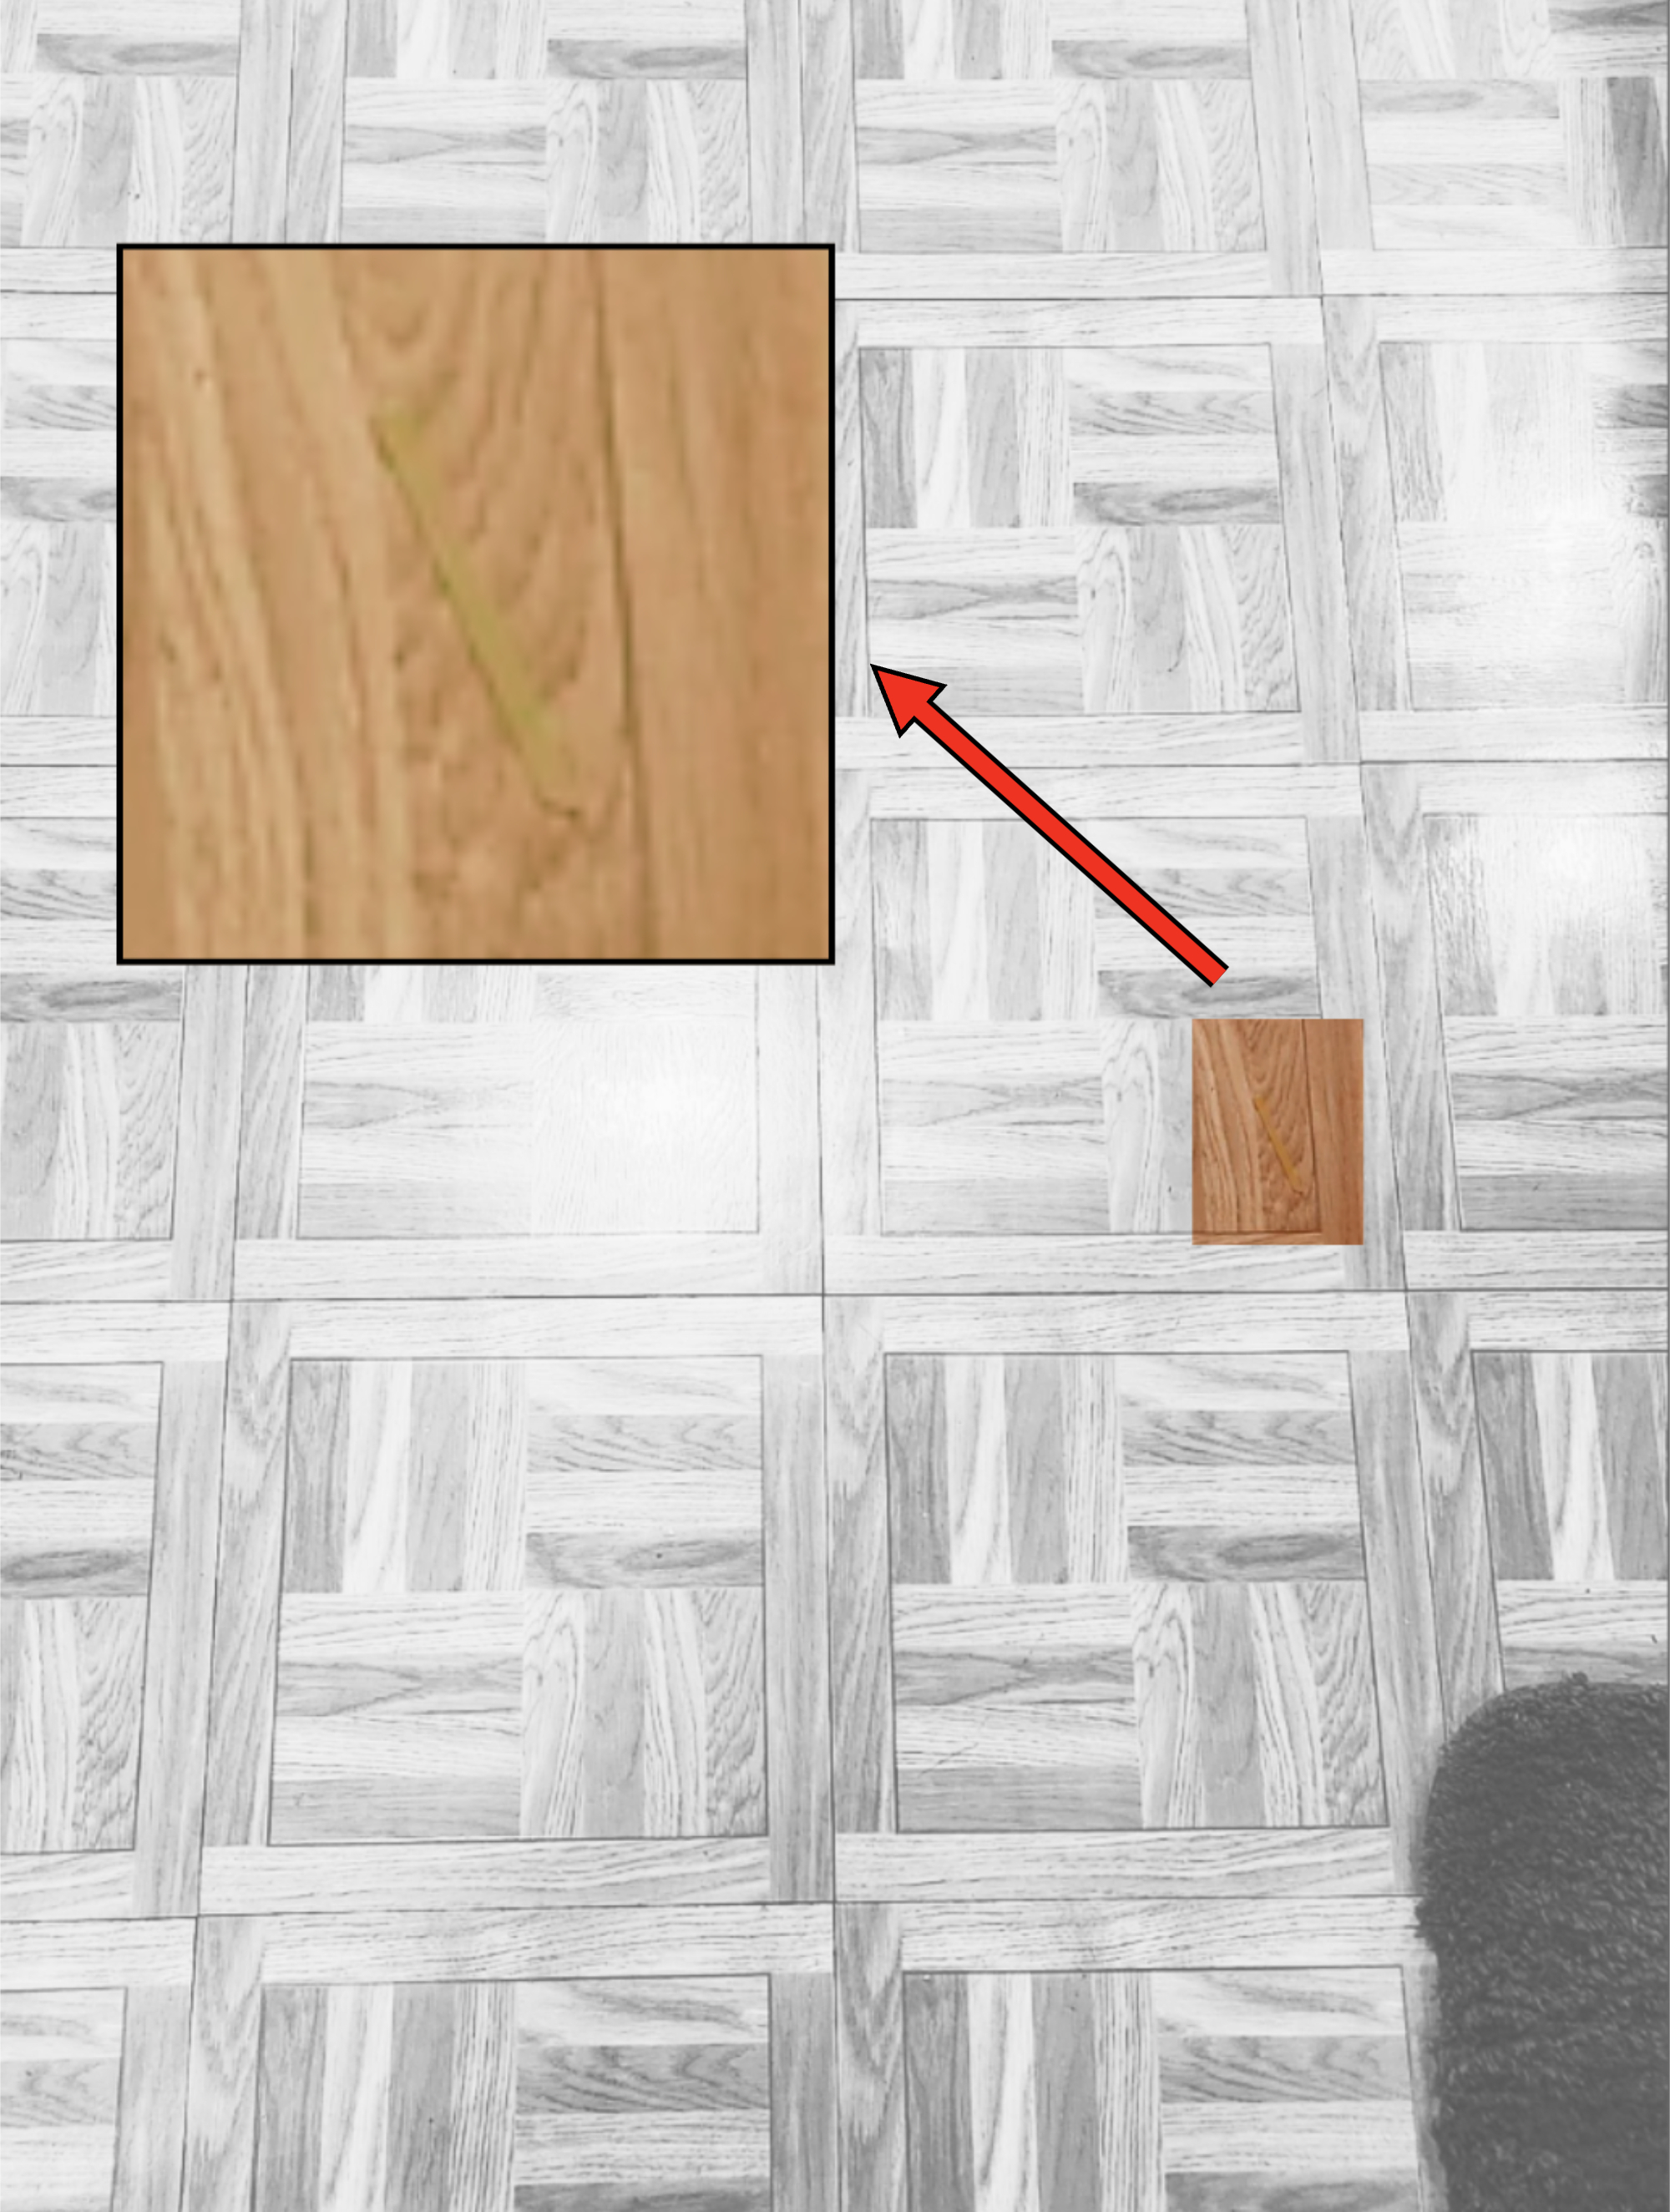 Close-up of a parquet floor with woodgrain textures. A small green object, possibly a piece of string or plant, is highlighted on one of the tiles